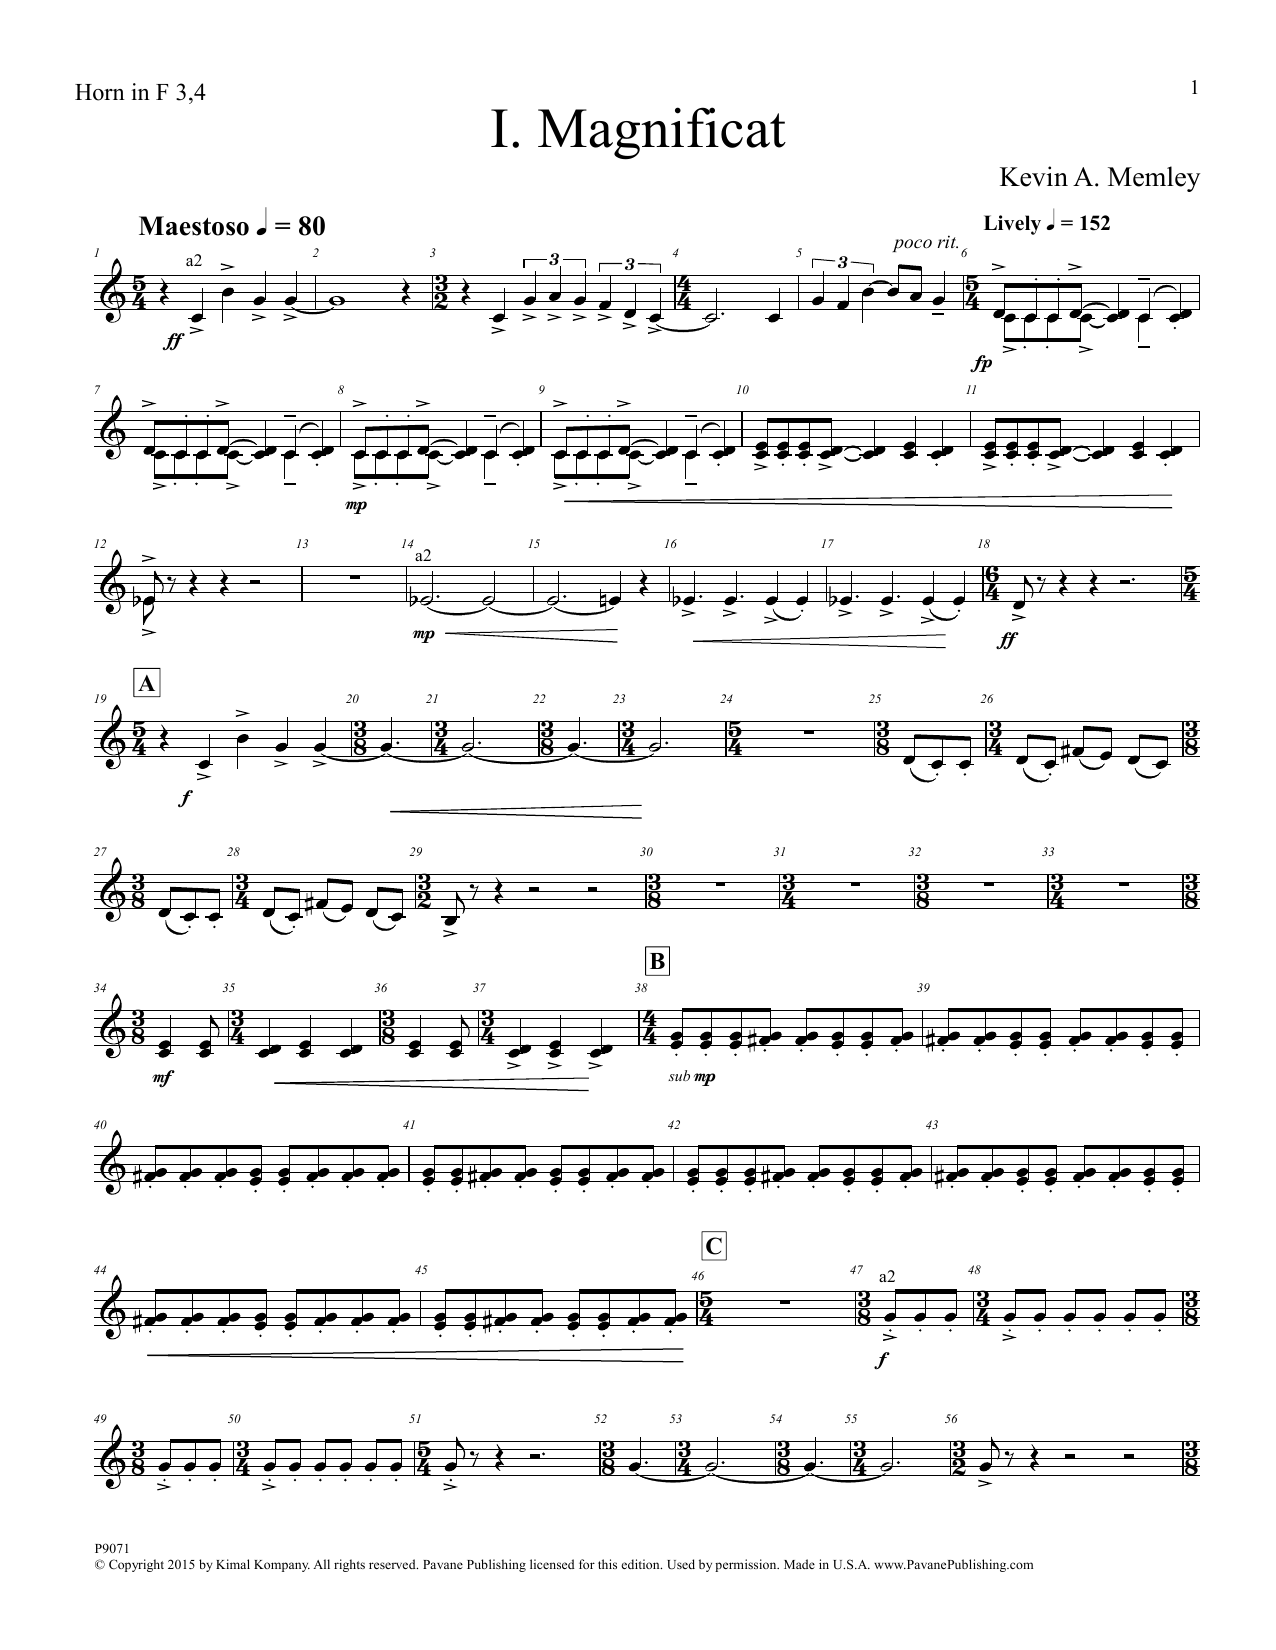 Download Kevin A. Memley Magnificat - Violoncello Sheet Music